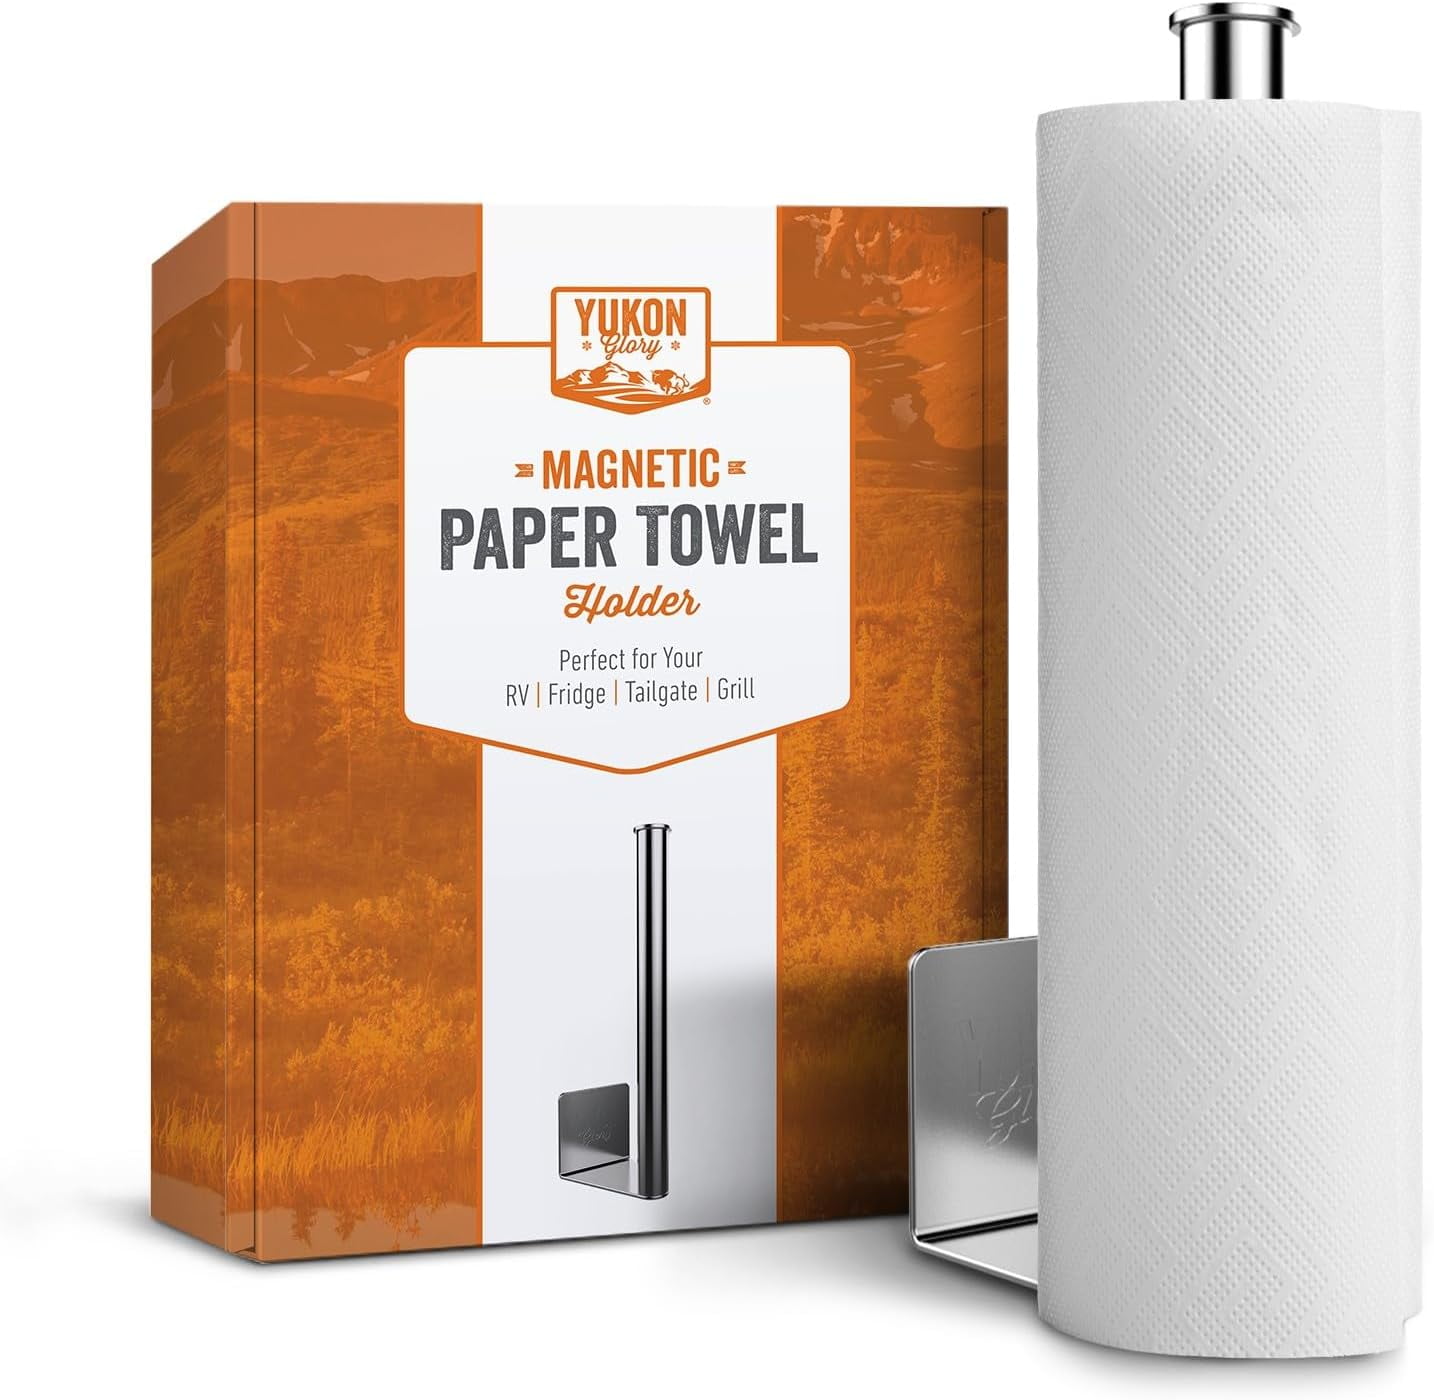 Dear Household Stainless Steel Paper Towel Holder Stand Designed for Easy  One- Handed Operation - This Sturdy Weighted Paper Towel Holder Countertop  Model Has Suction Cups and Holds Paper Towel Rolls 